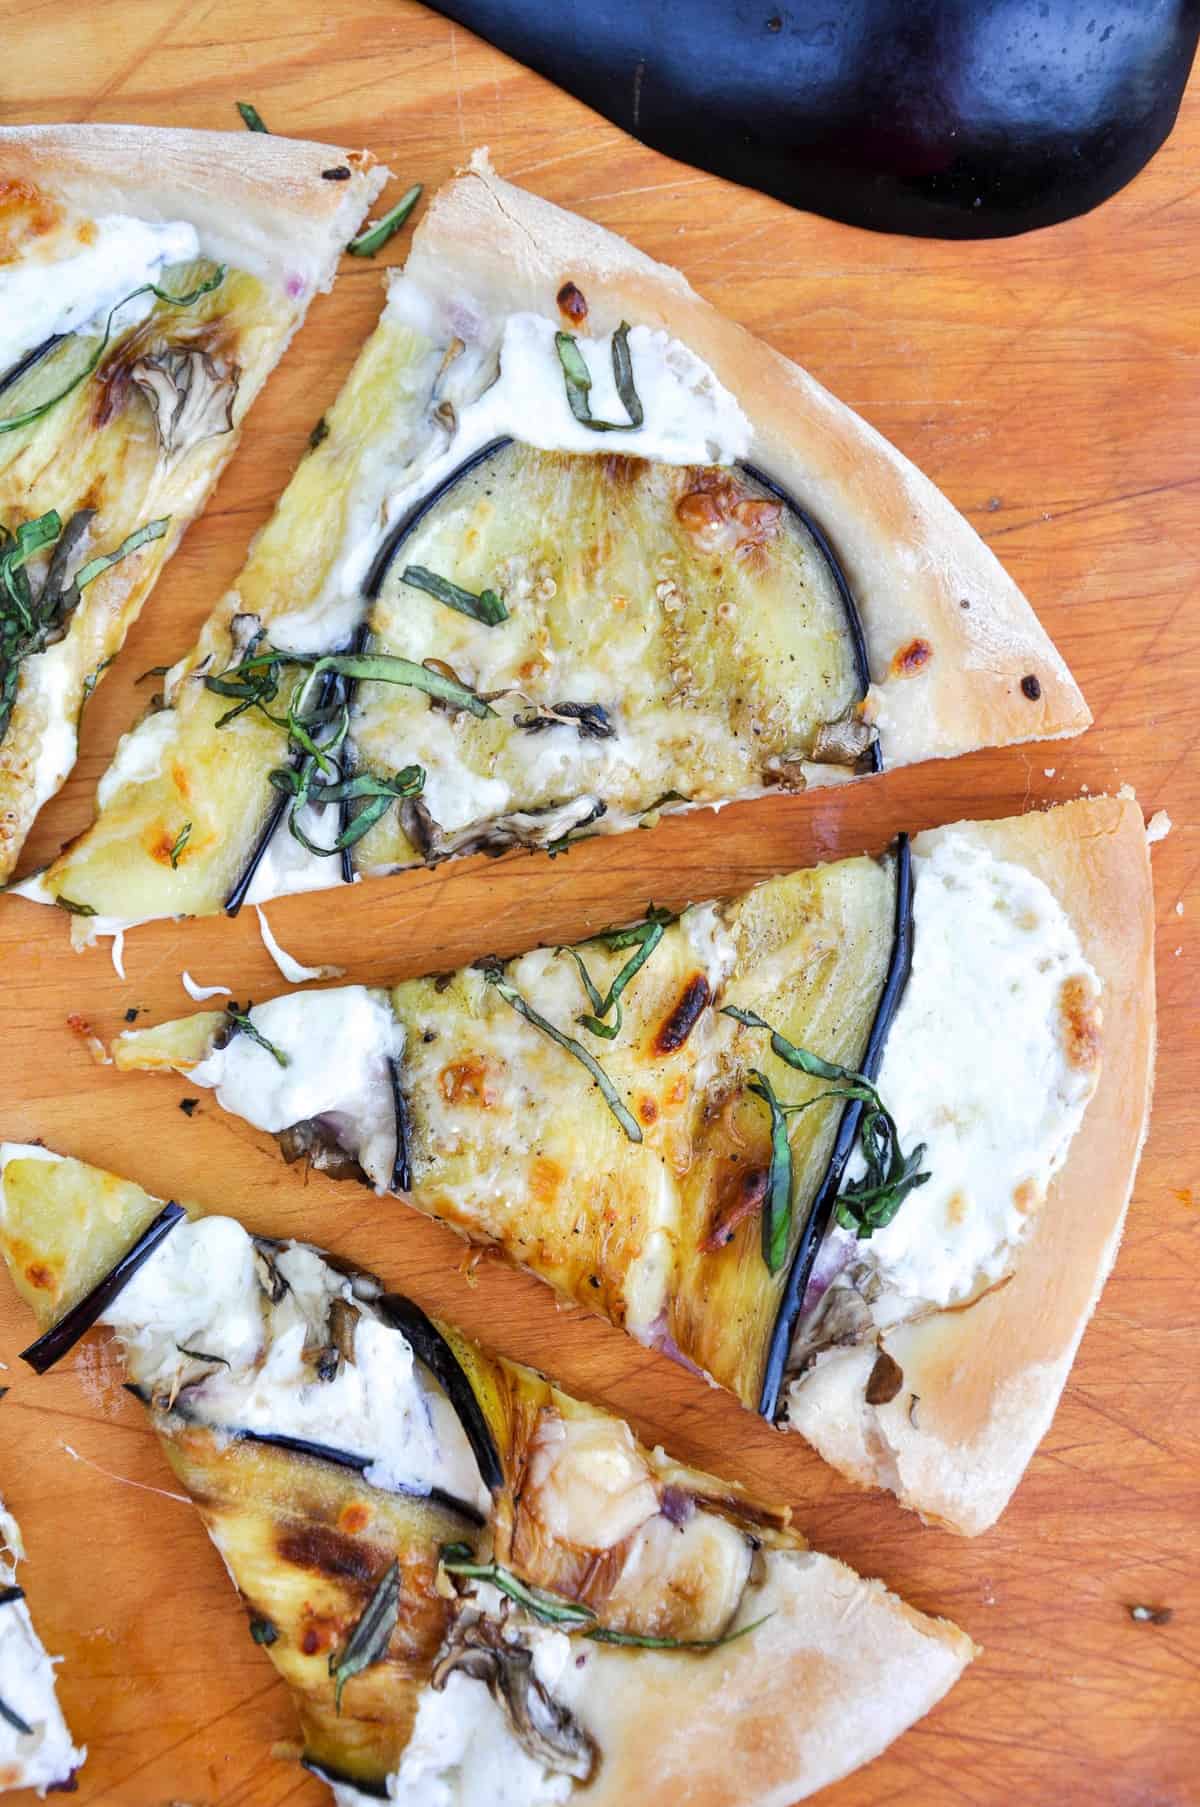 A Pizza With Eggplant You Should Make Soon!